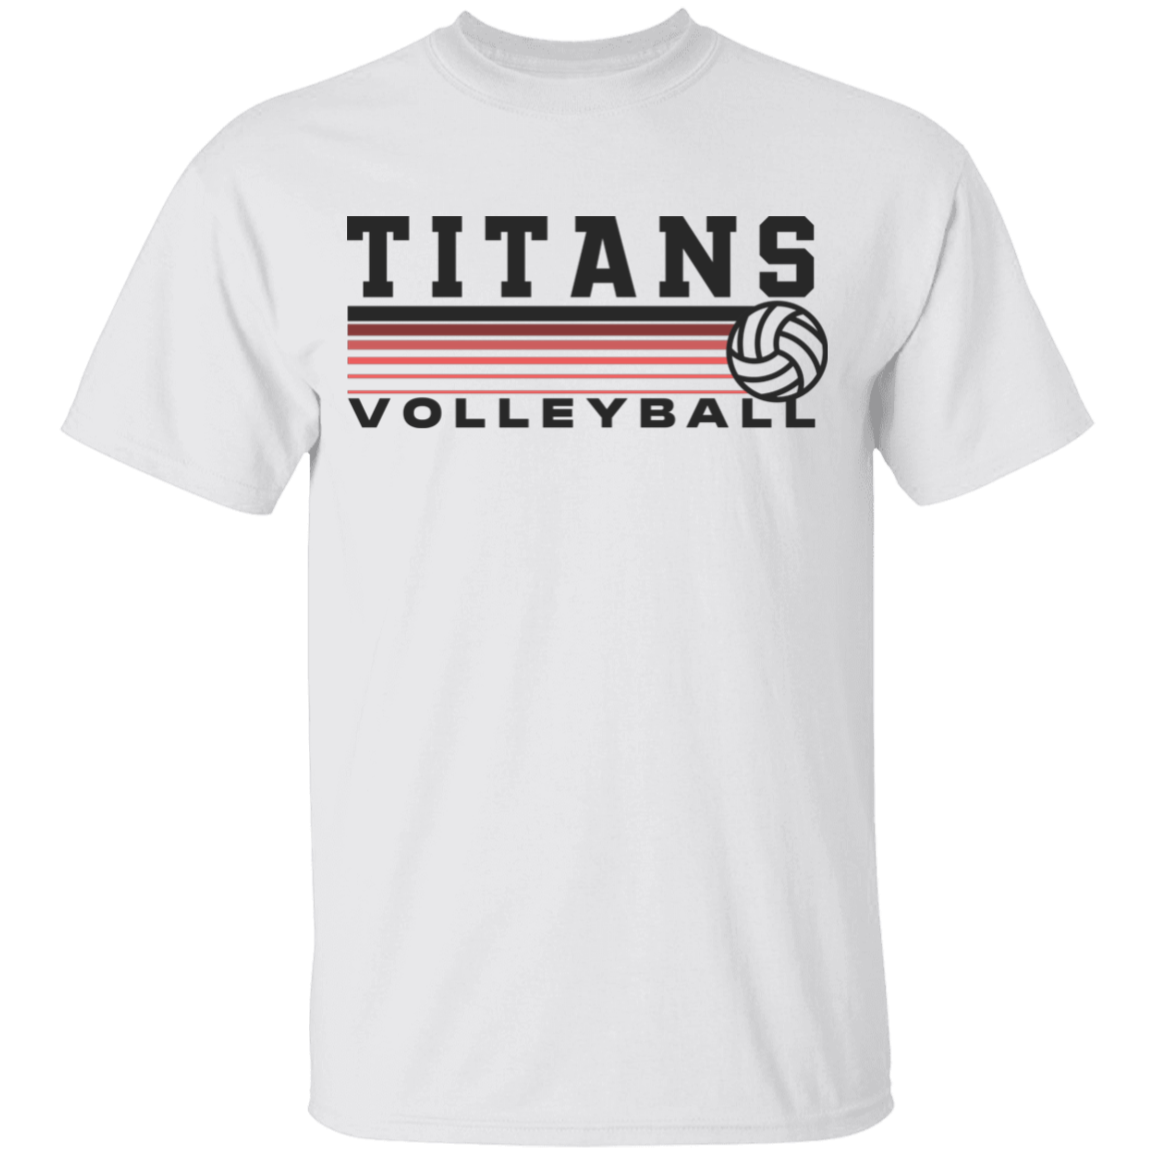 TITANS Volleyball Youth 100% Cotton T-Shirt